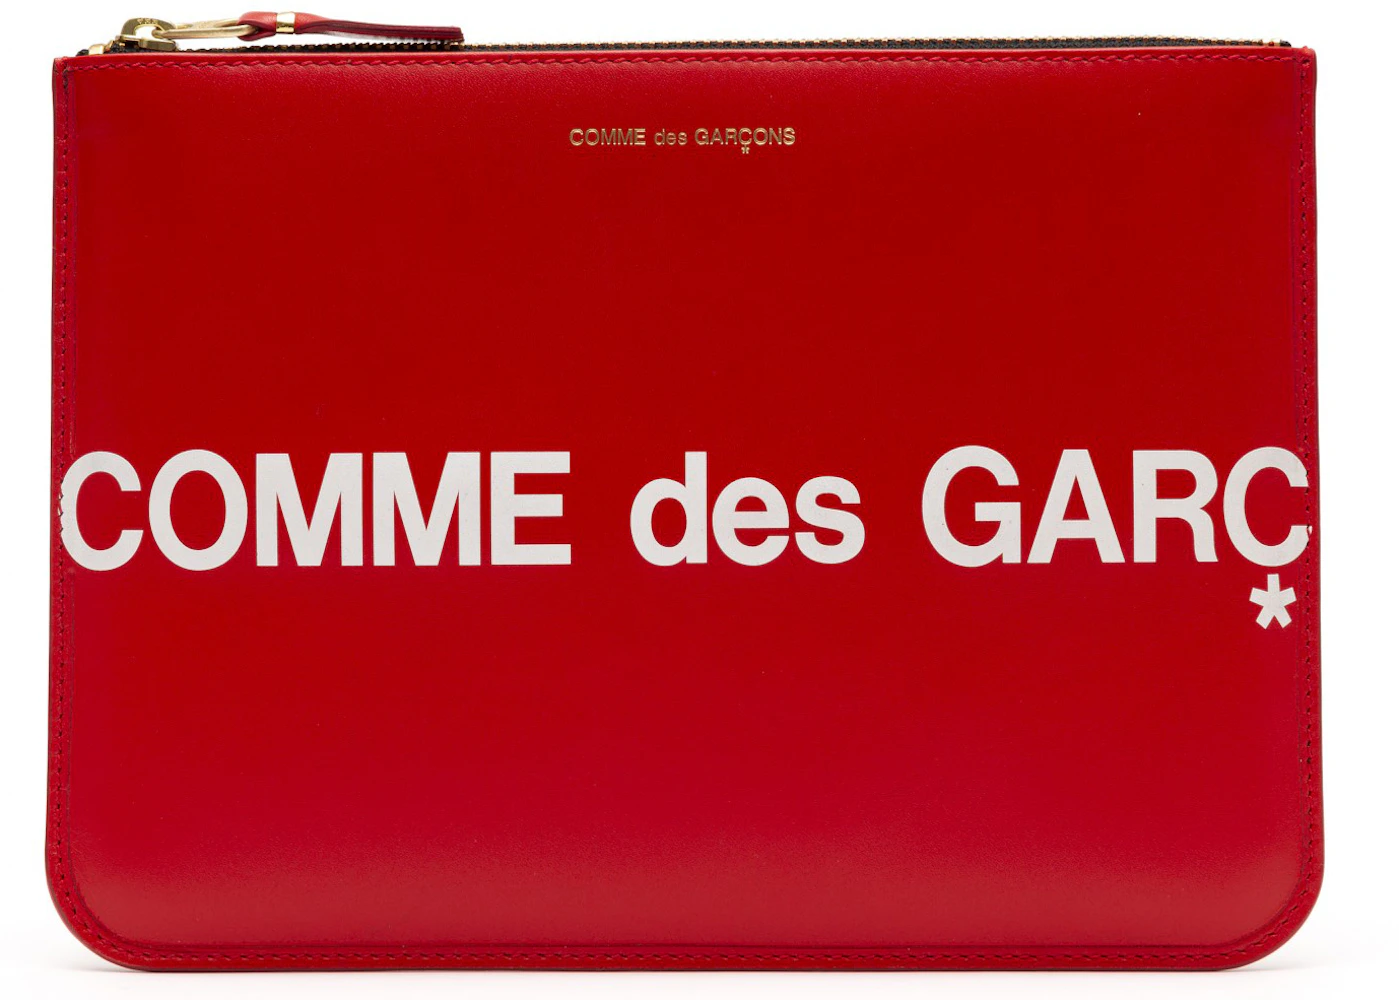 Comme des Garcons SA5100HL Huge Logo Wallet Red in Leather with Gold ...